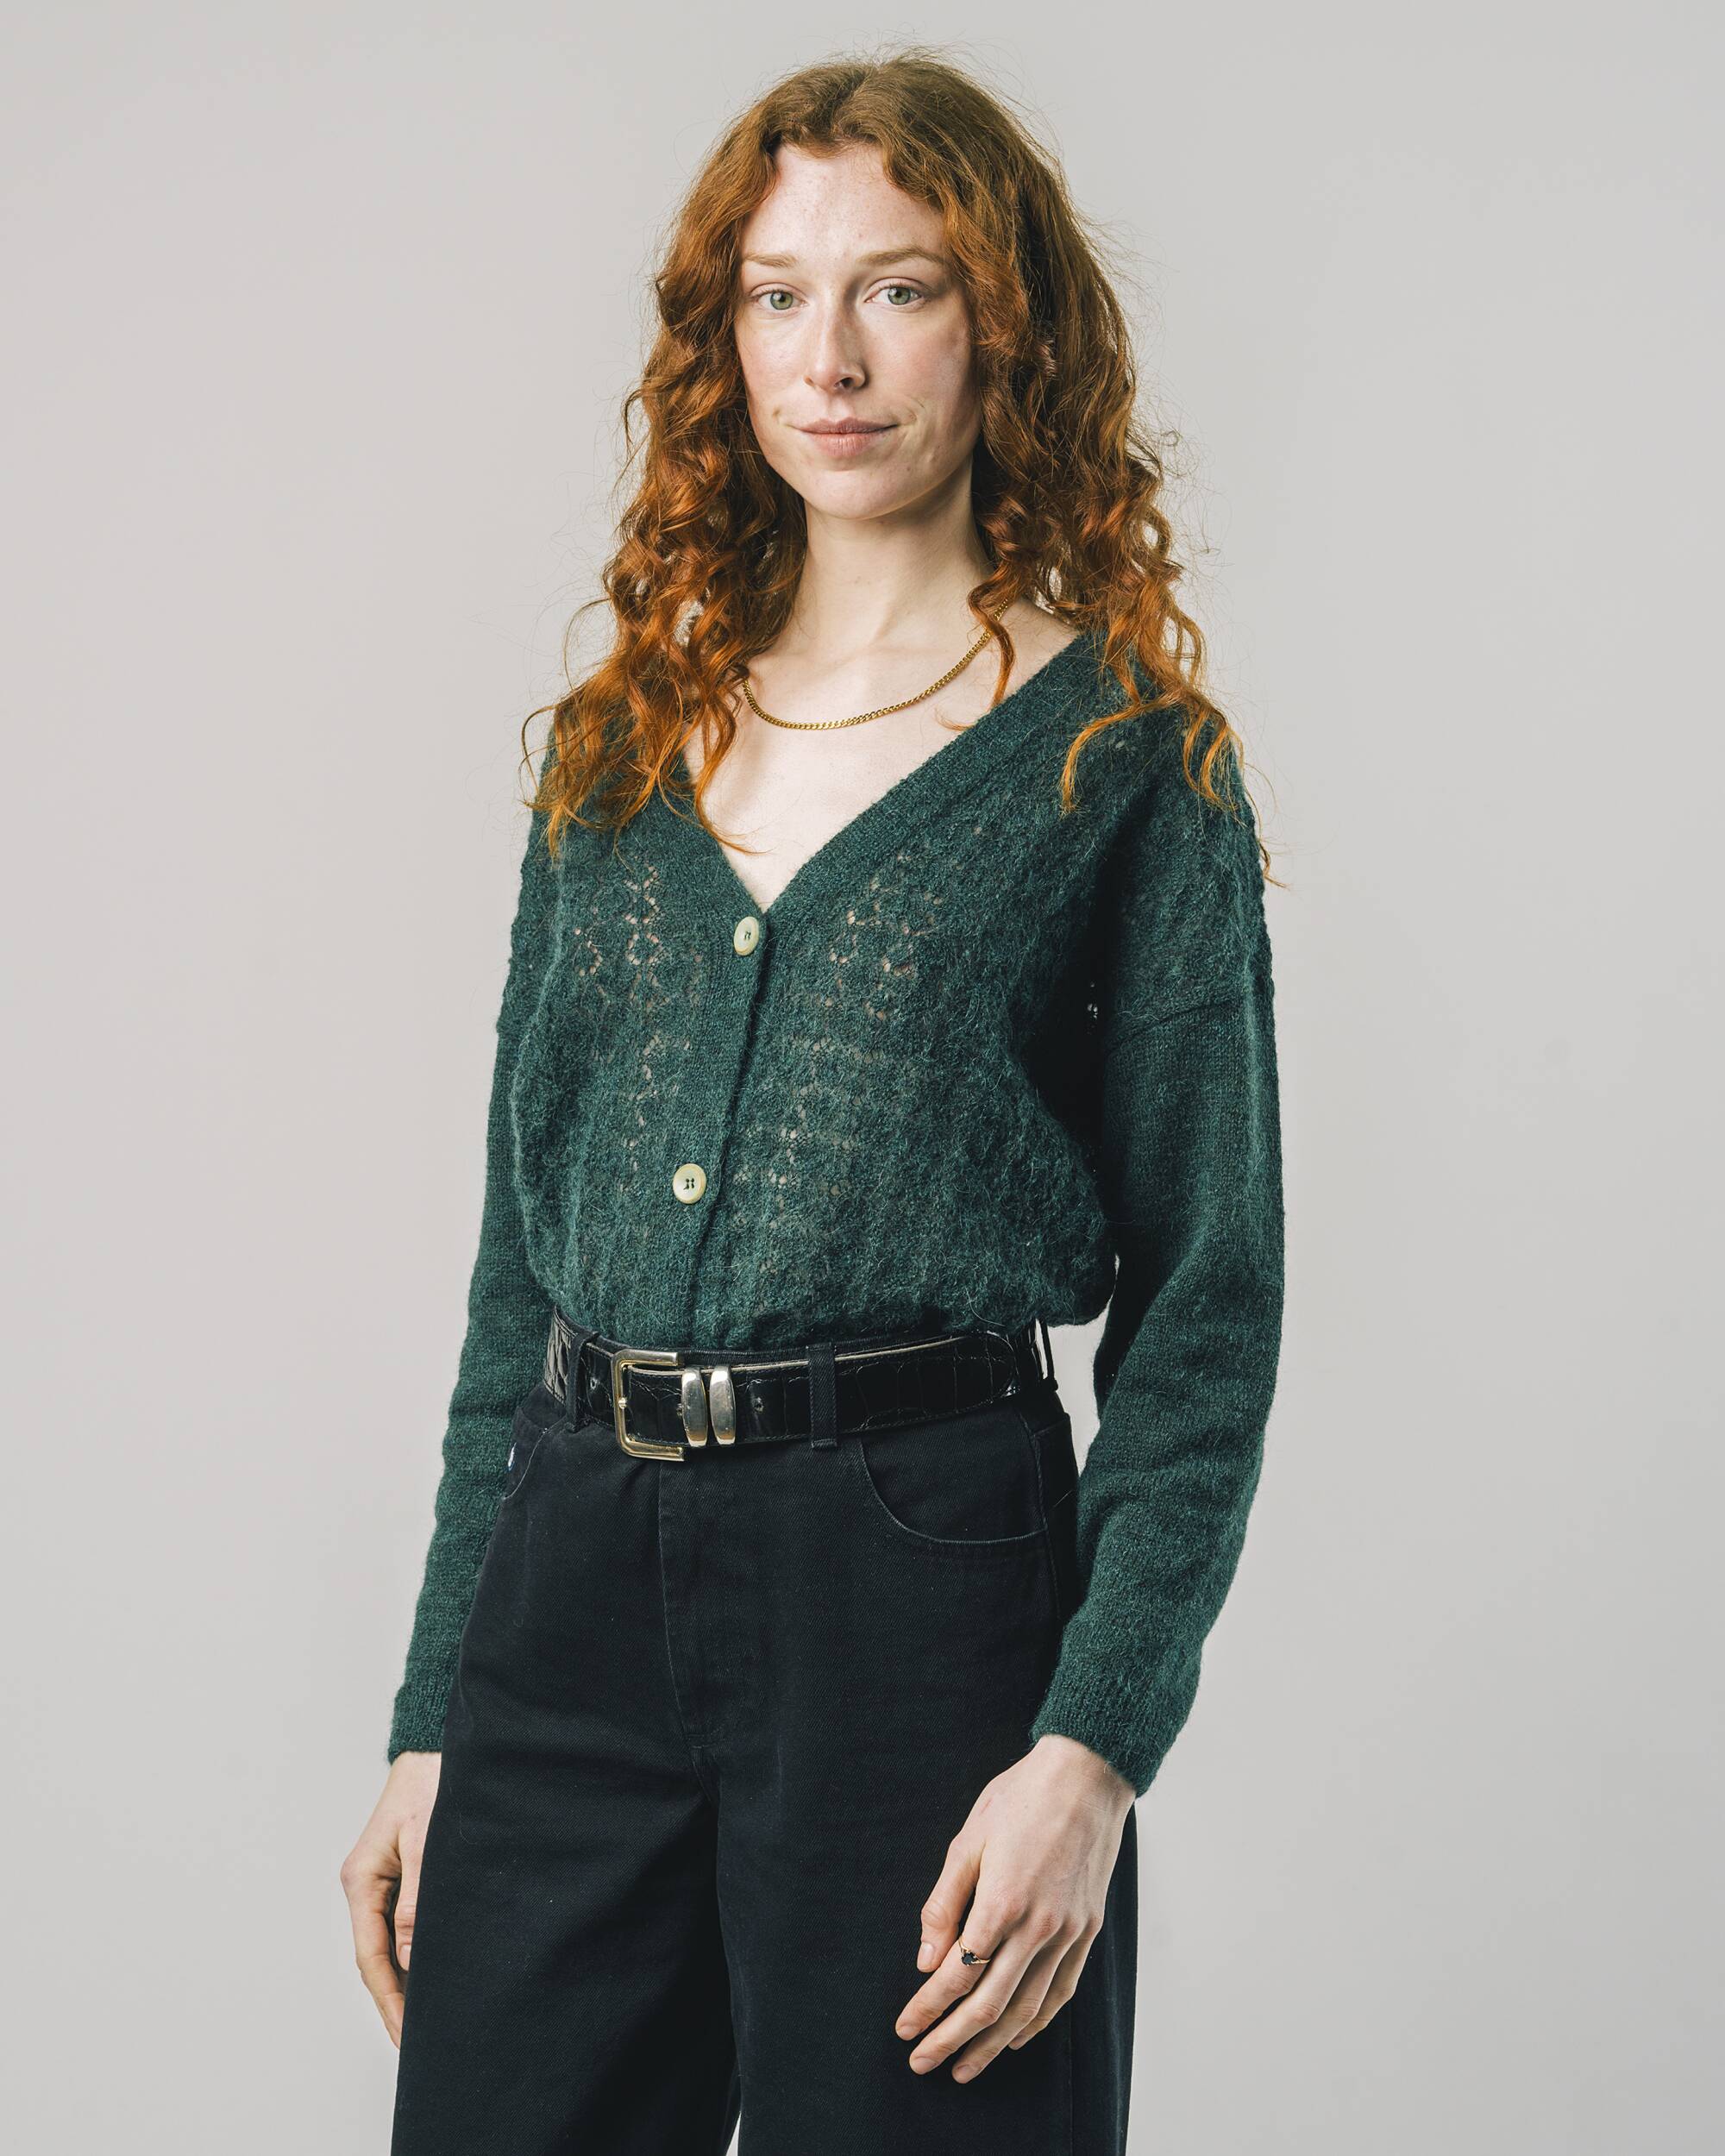 Oversized cardigan "Lace" in green made from 100% recycled fibers from Brava Fabrics